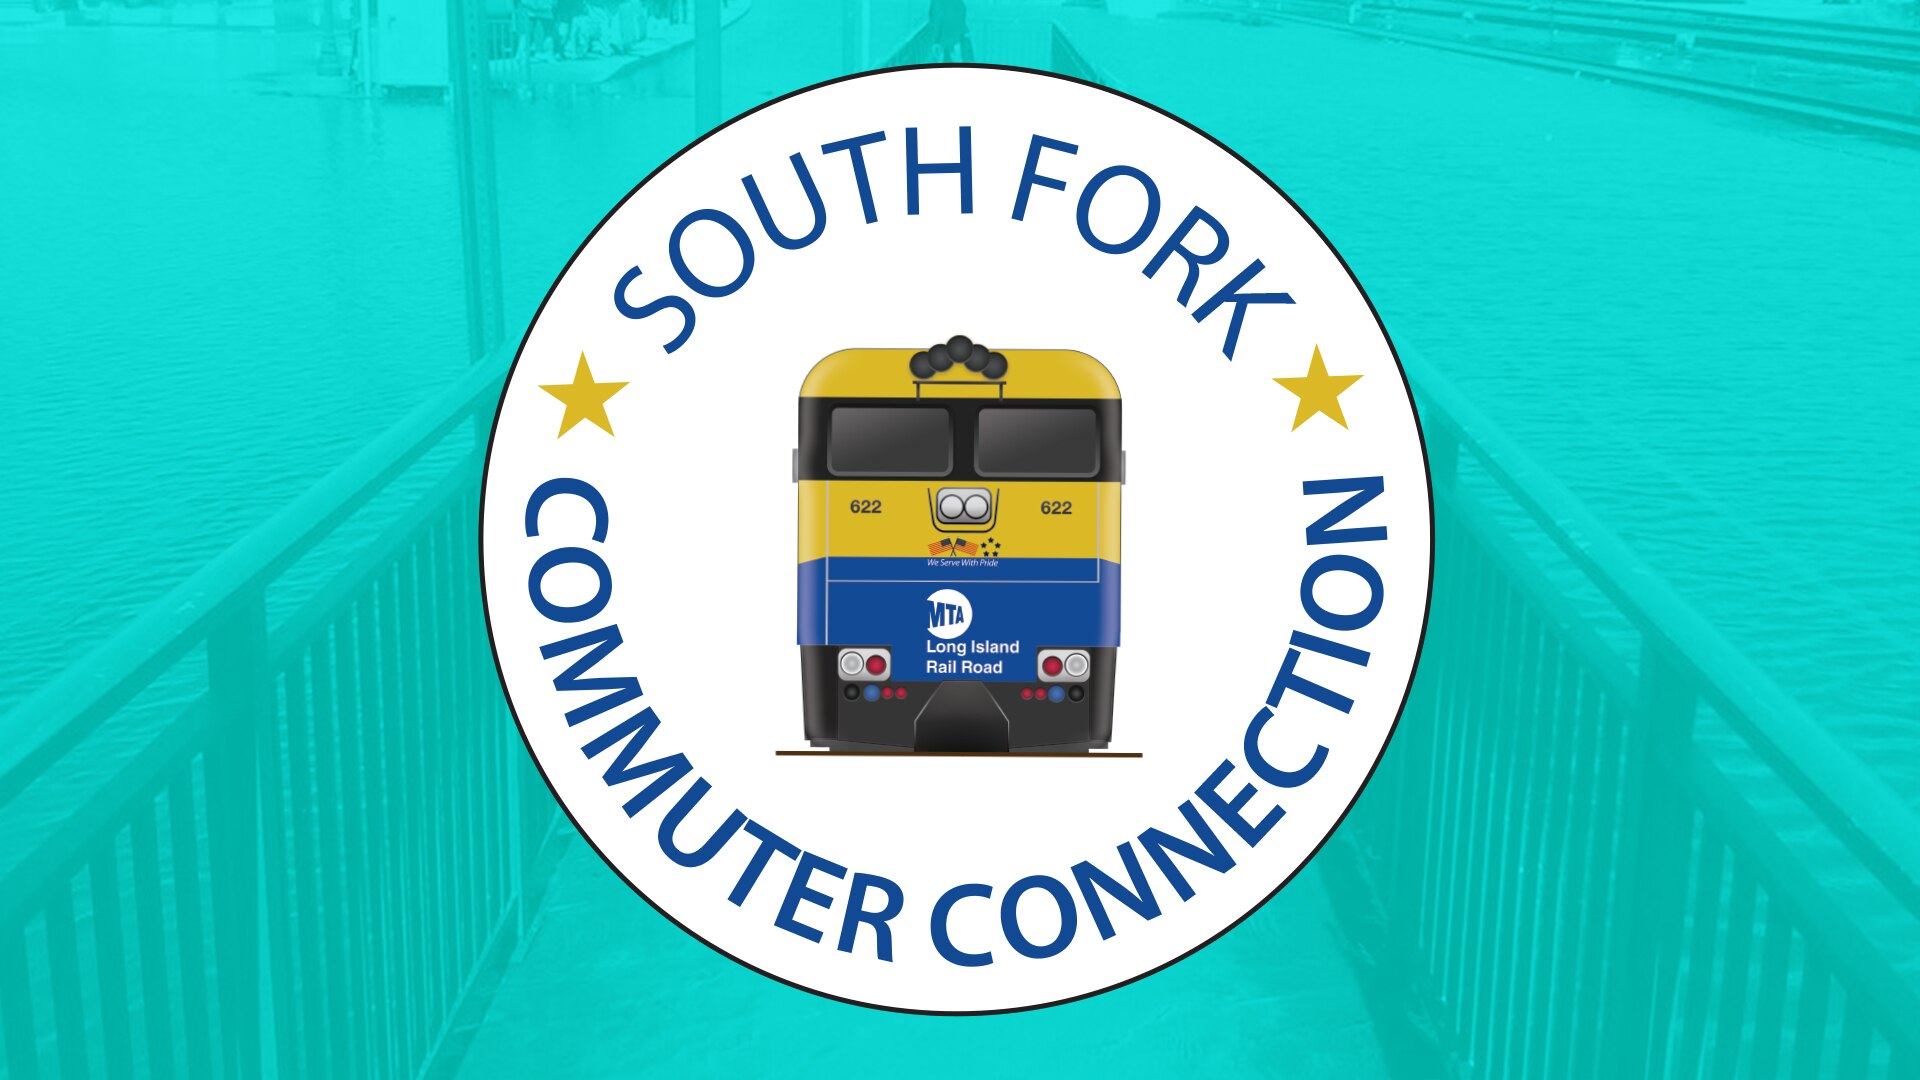 South Fork Commuter Connection Returns Tuesday, September 7